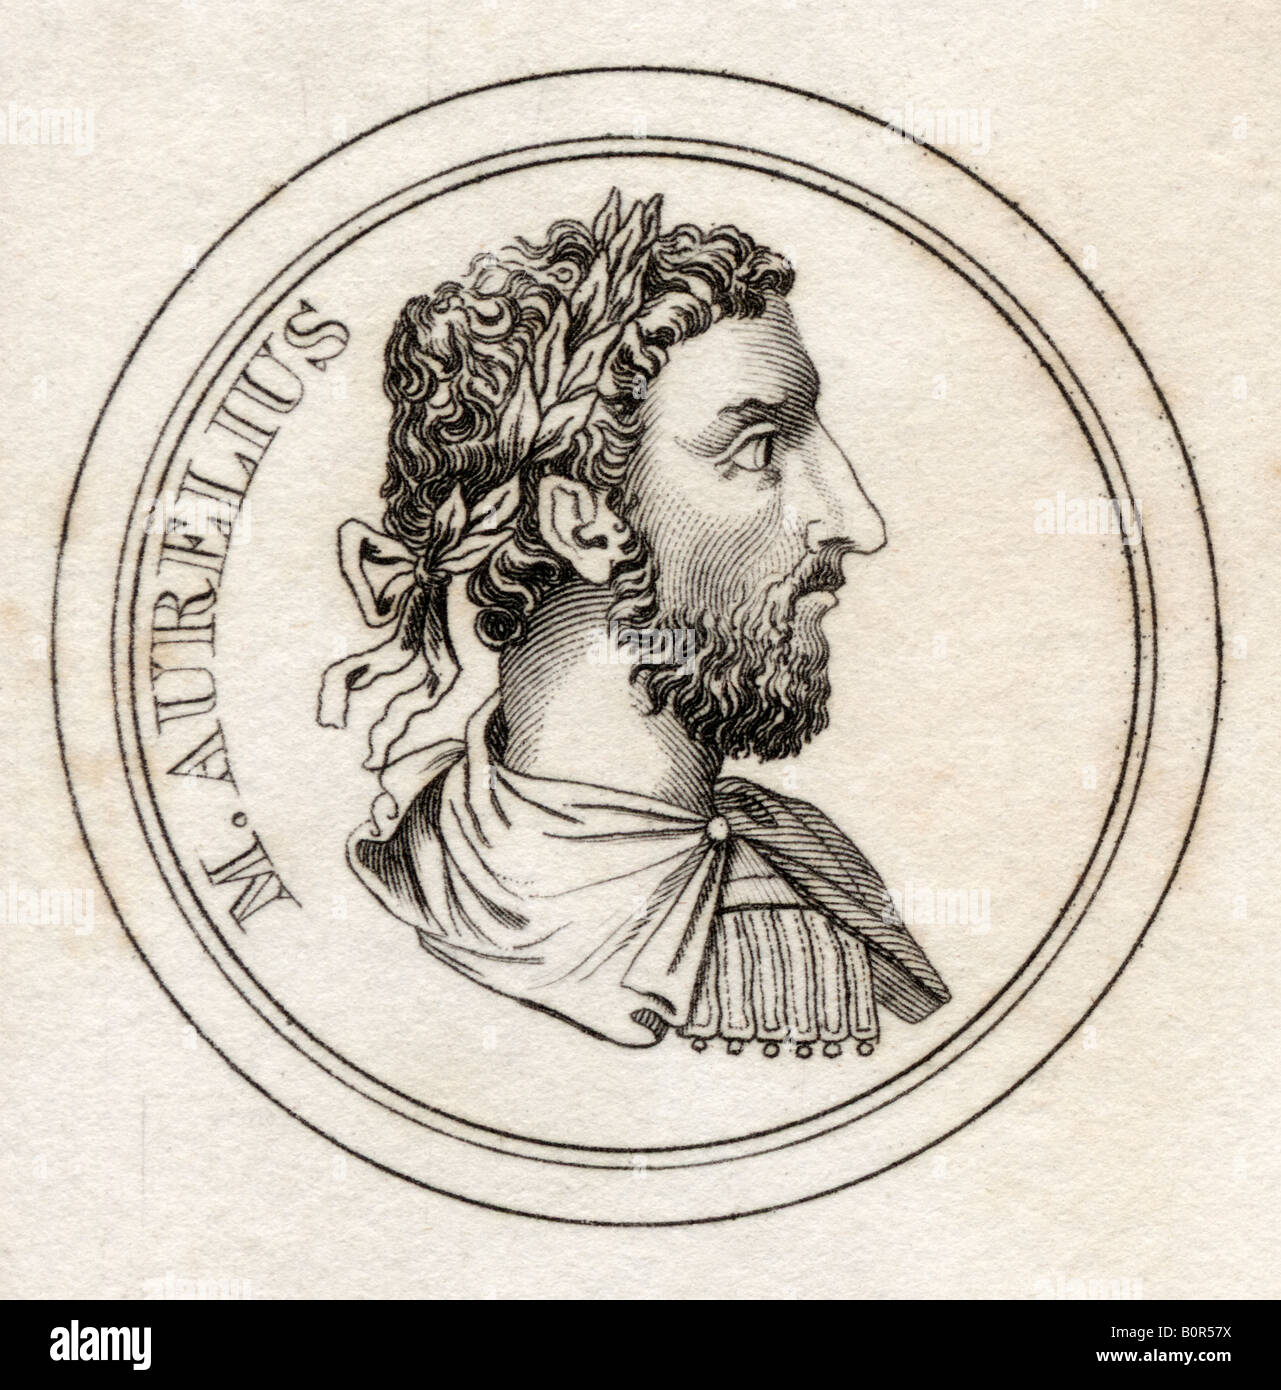 Marcus Aurelius, 121 - 180 A.D. Roman Emperor.  From the book Crabbs Historical Dictionary, published 1825. Stock Photo